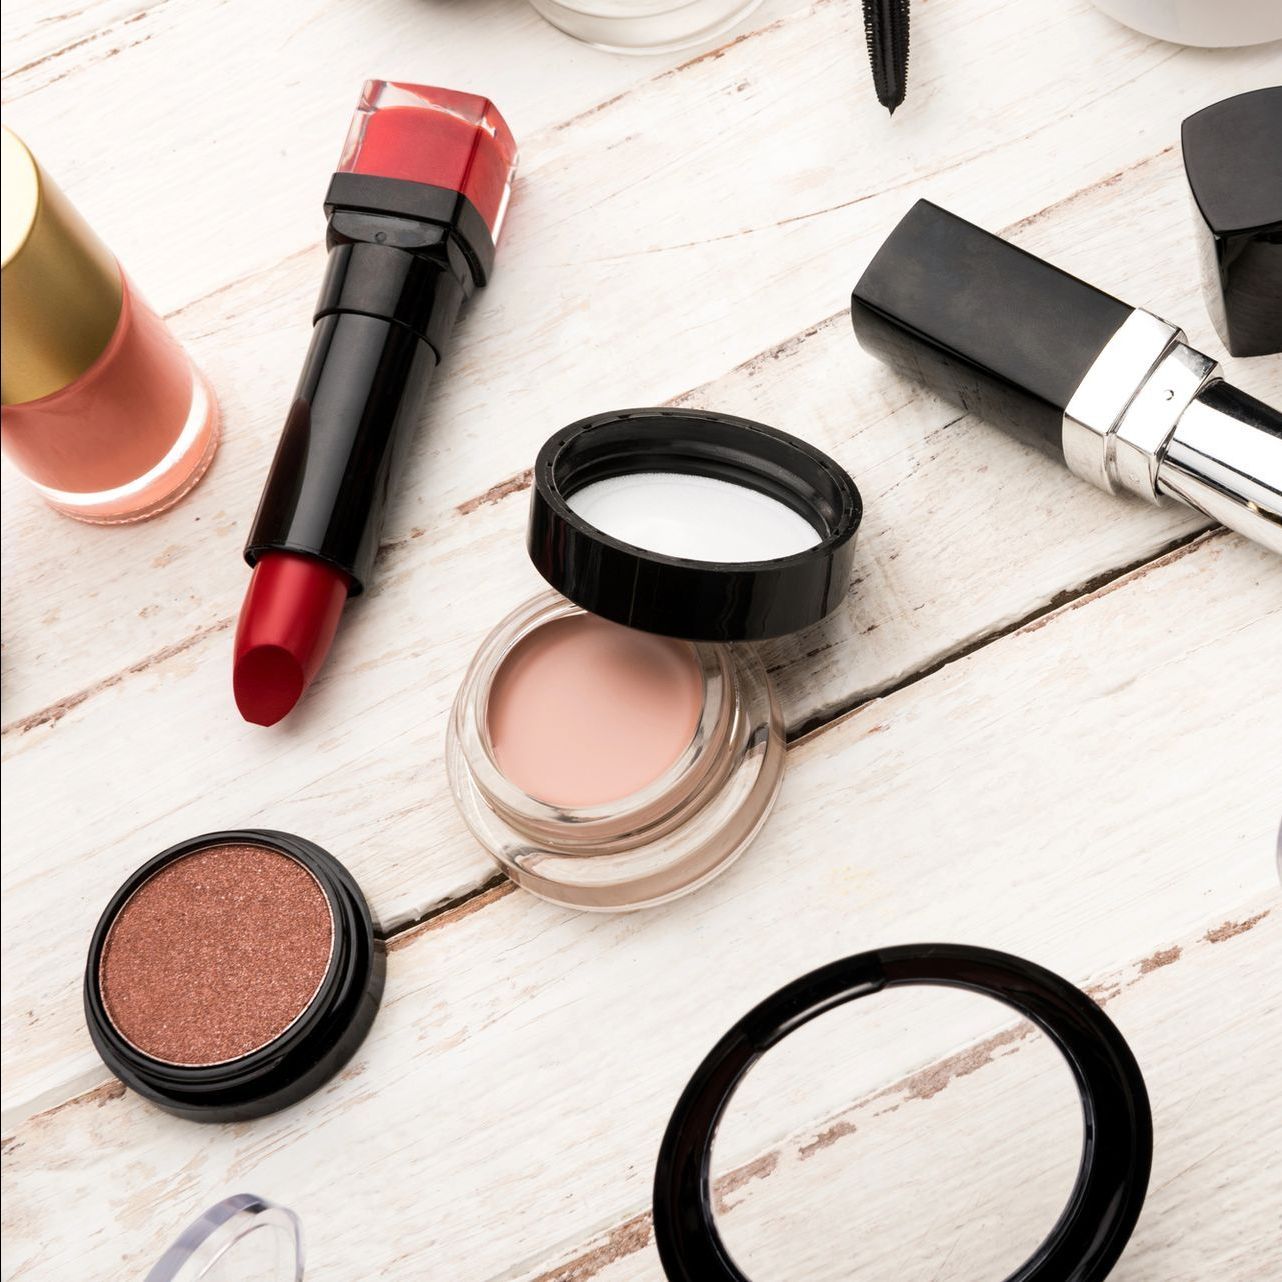 A variety of makeup products are laid out on a wooden table